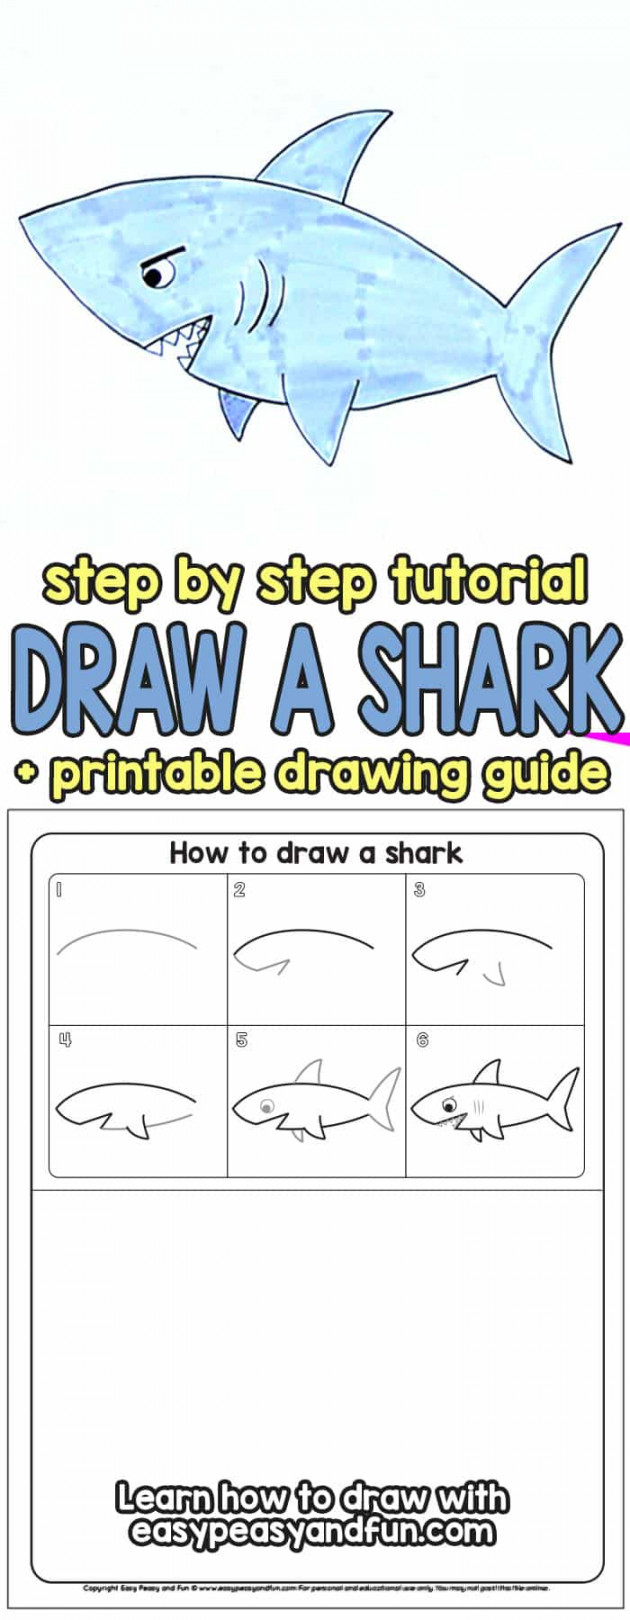 How to Draw a Shark - Easy Peasy and Fun